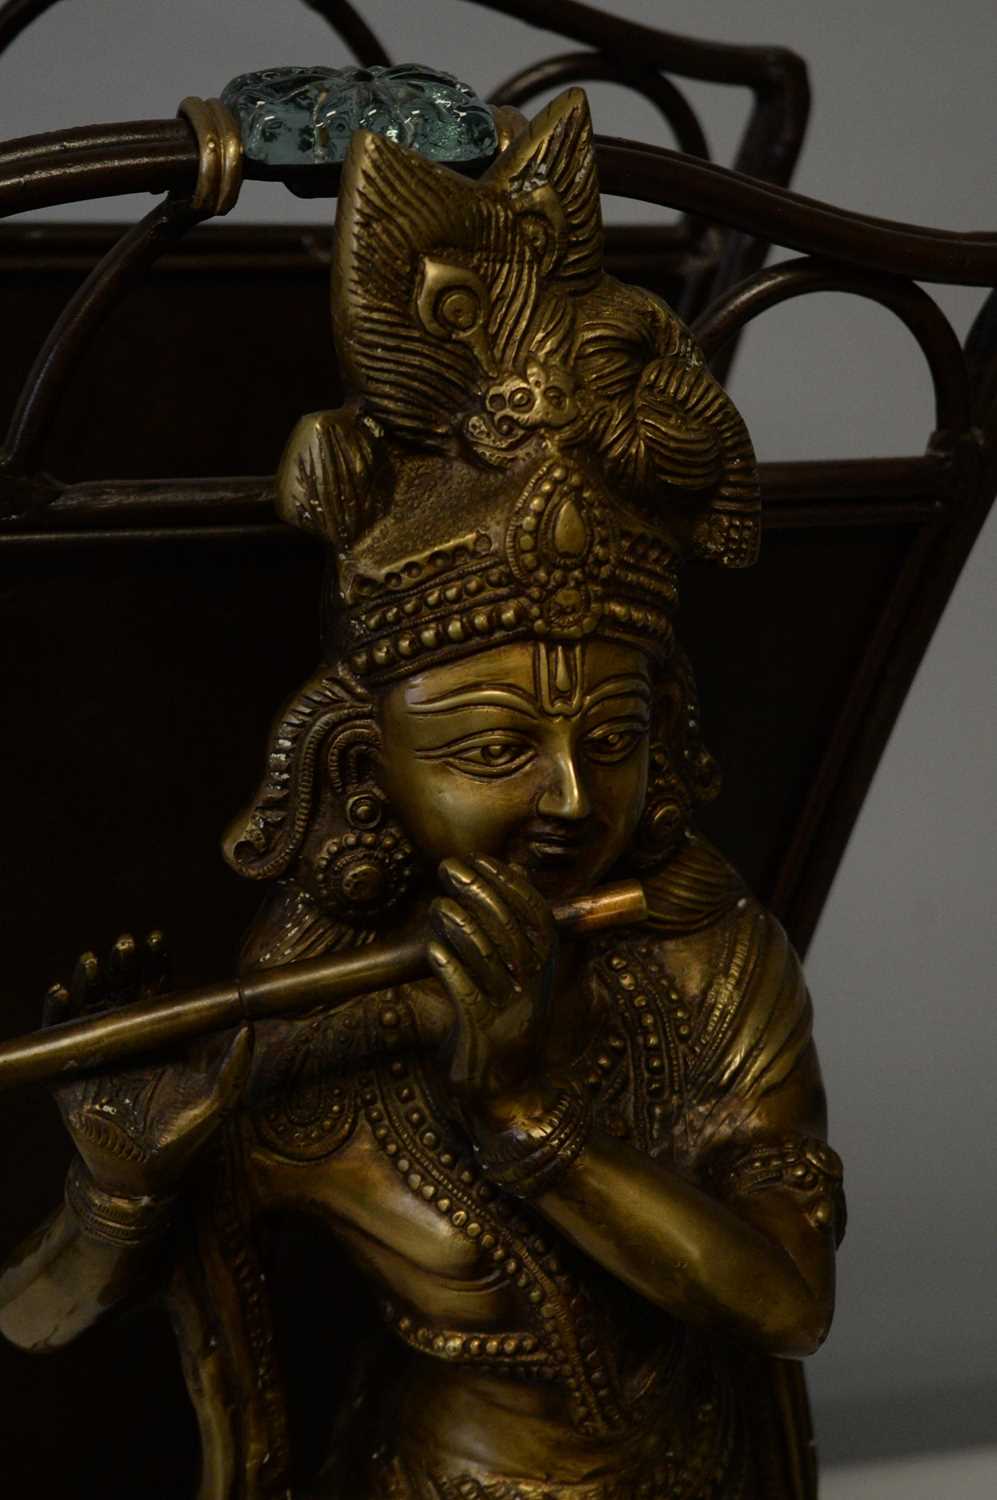 Lot 317 - Repro Indian brass deity; Asian trivet; and a repro bronzed magazine rack.